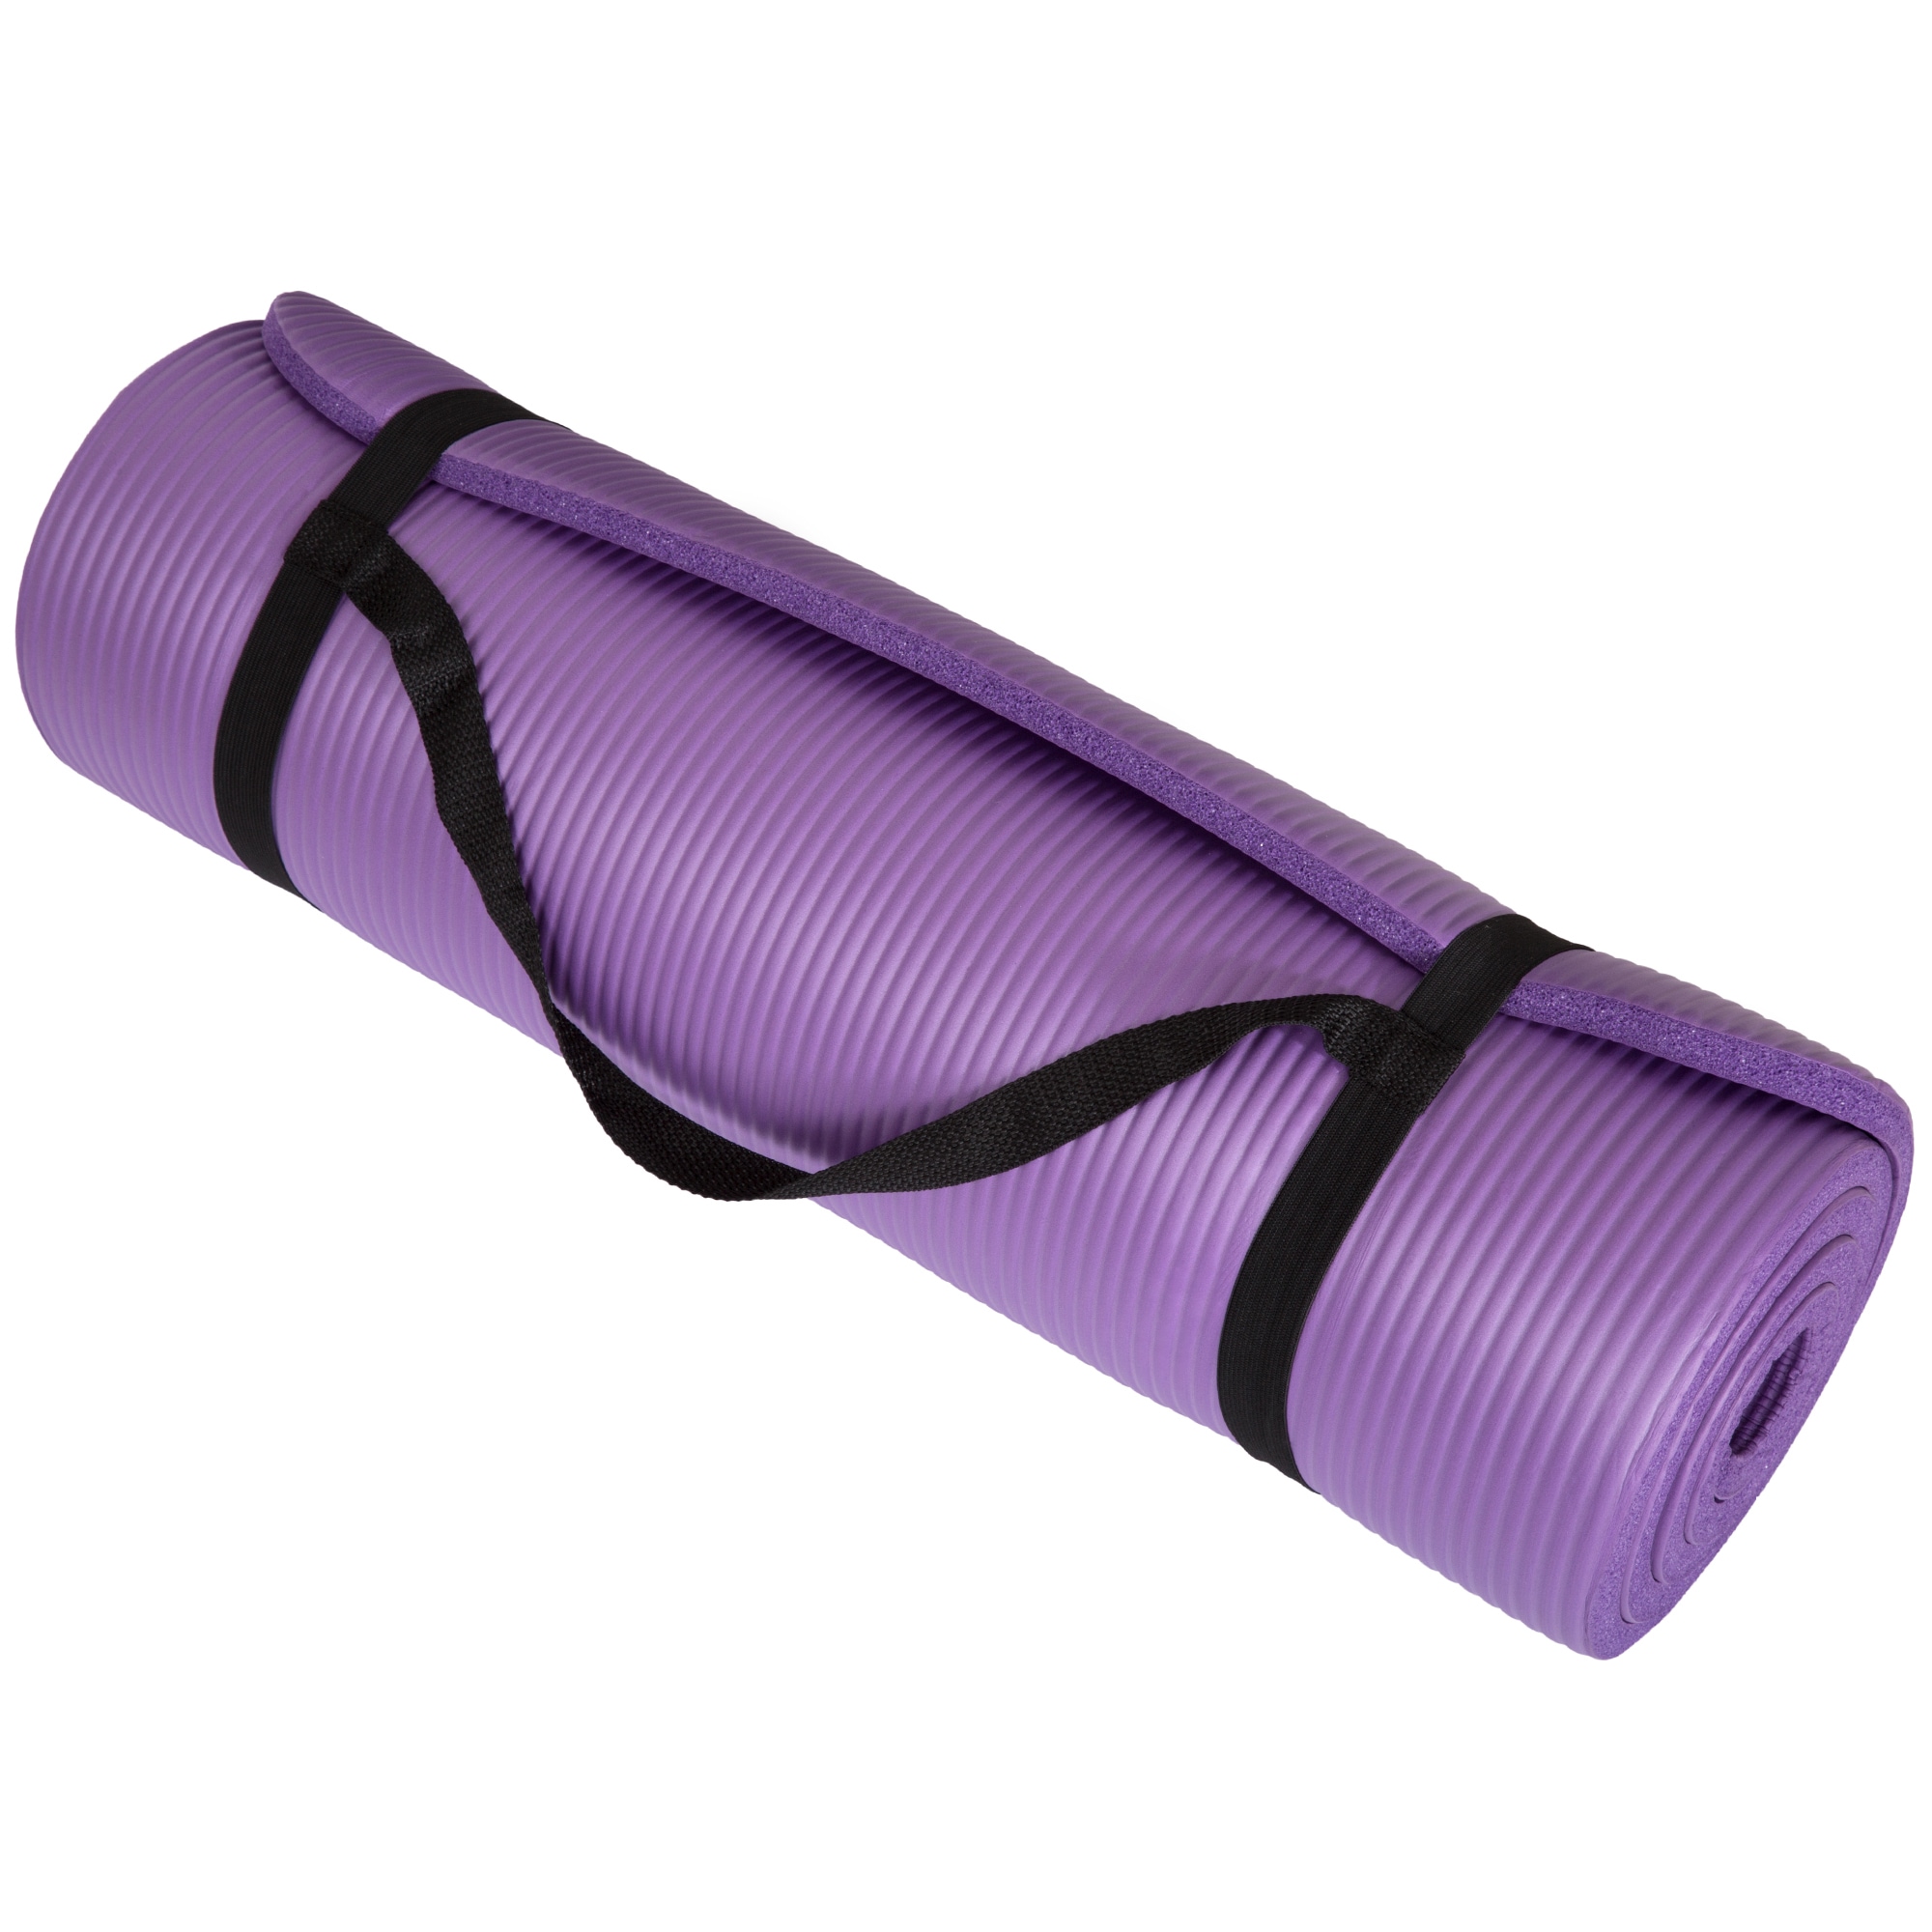 Thick Yoga Mat - Double Sided 1/2-Inch Workout Mat - 72x24-Inch Exercise Mat  for Home Gym Fitness with Strap by Wakeman - On Sale - Bed Bath & Beyond -  12306172